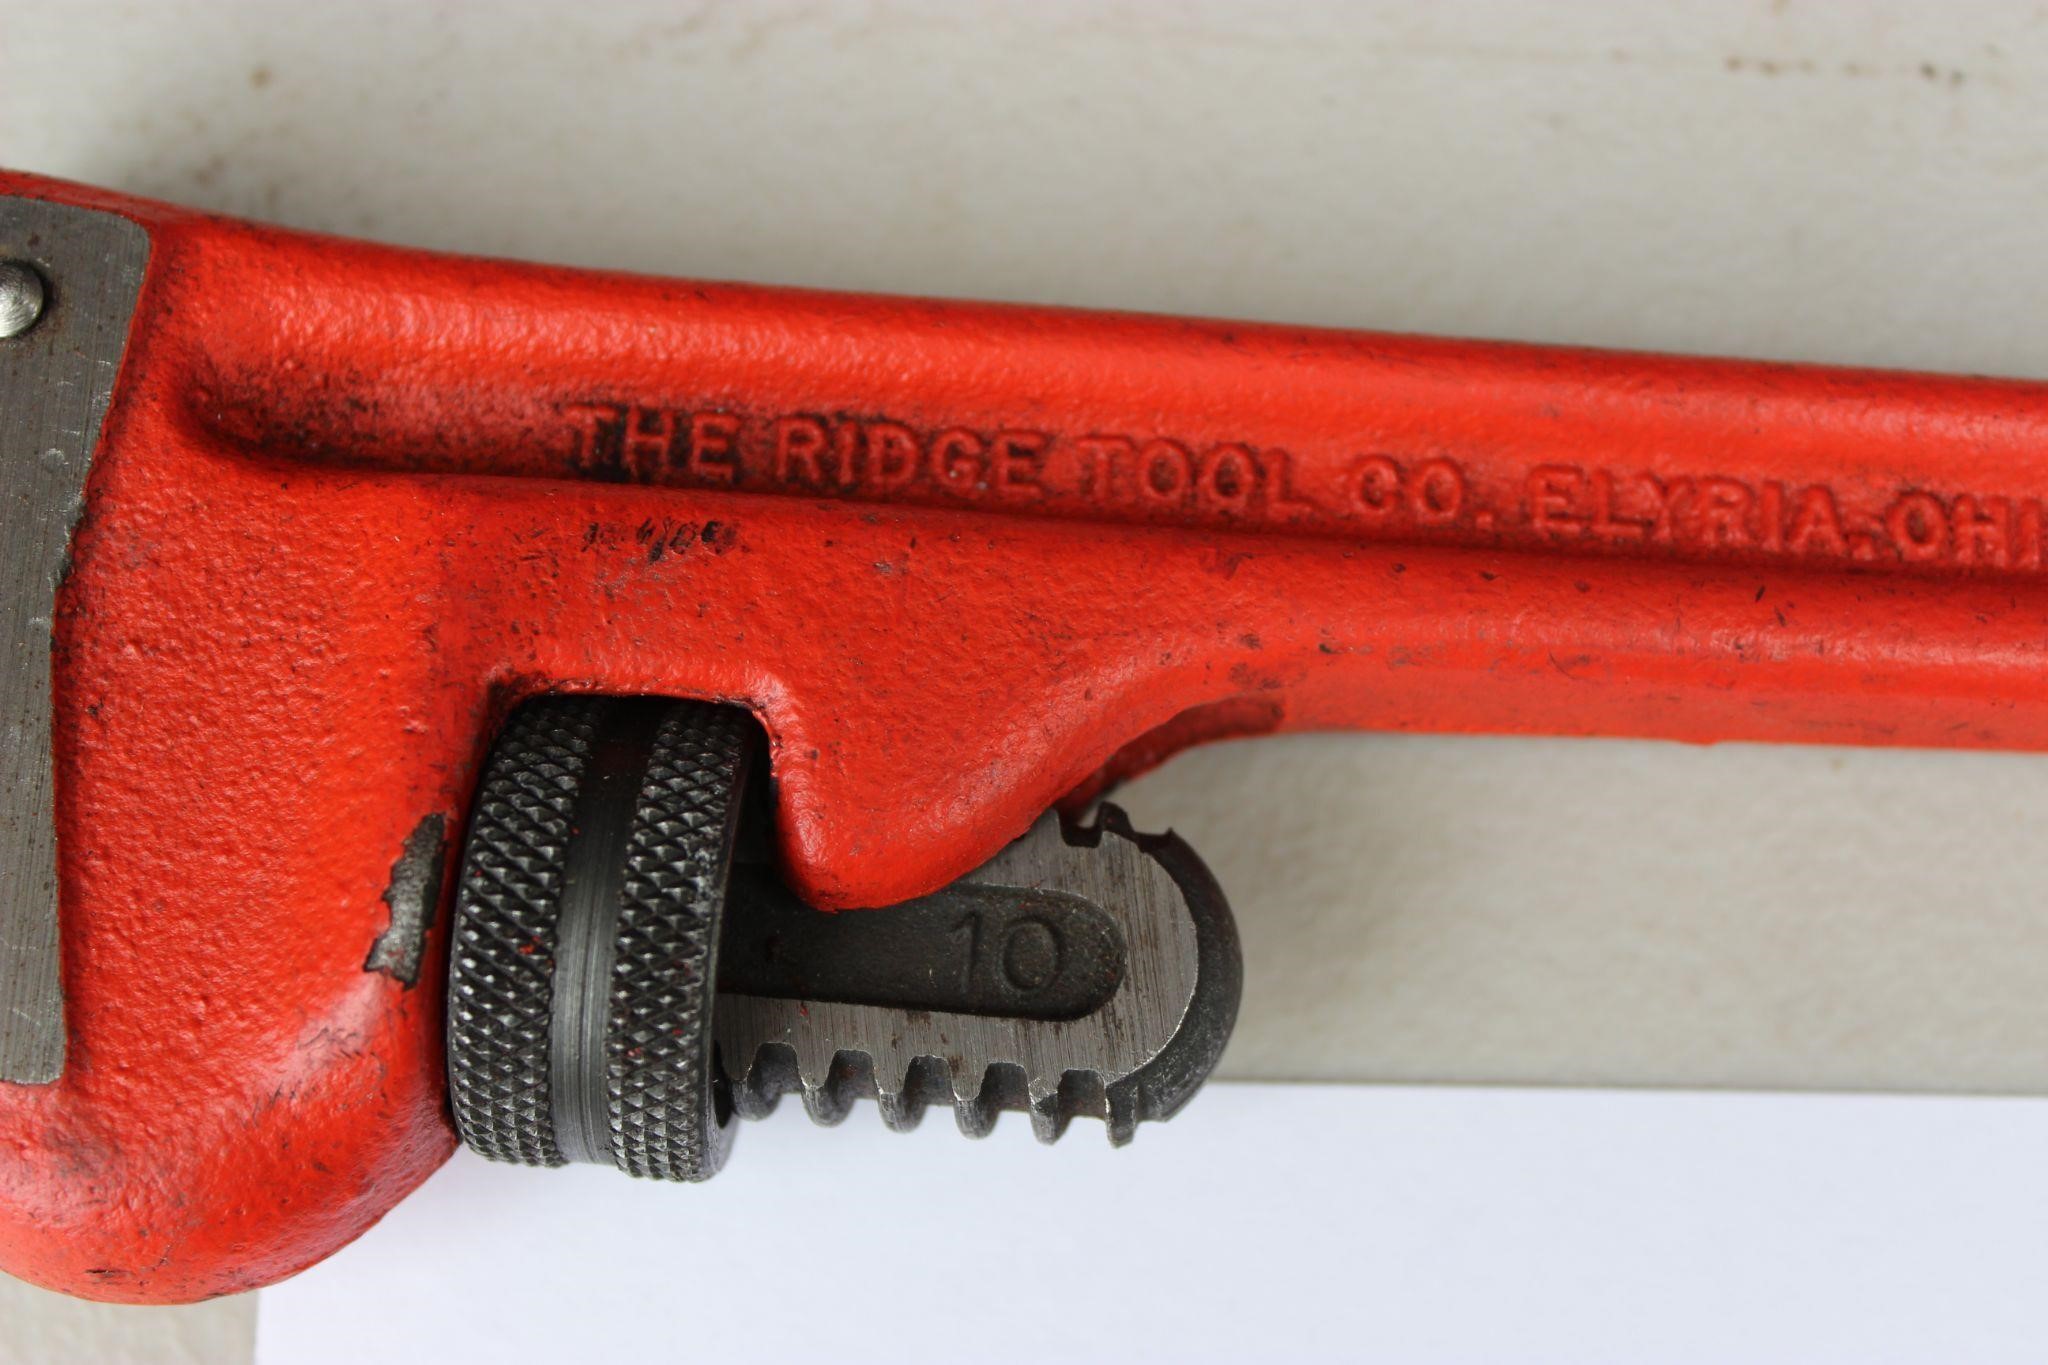 Ridige pipe wrench